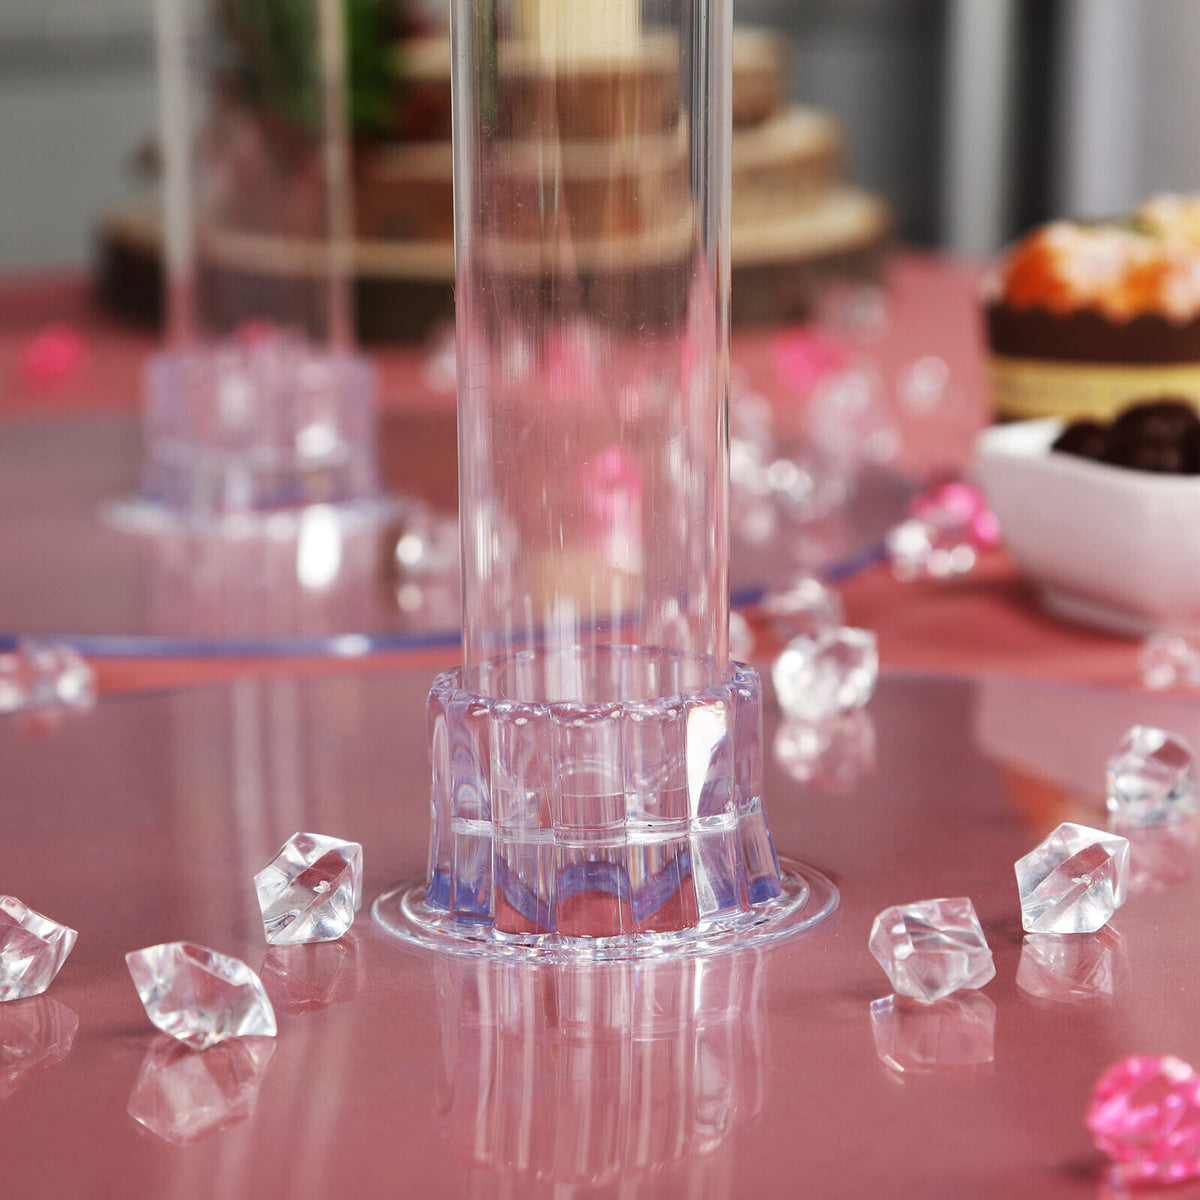 5 Tiers Acrylic Cake Stand Set Birthday Party Catering Display